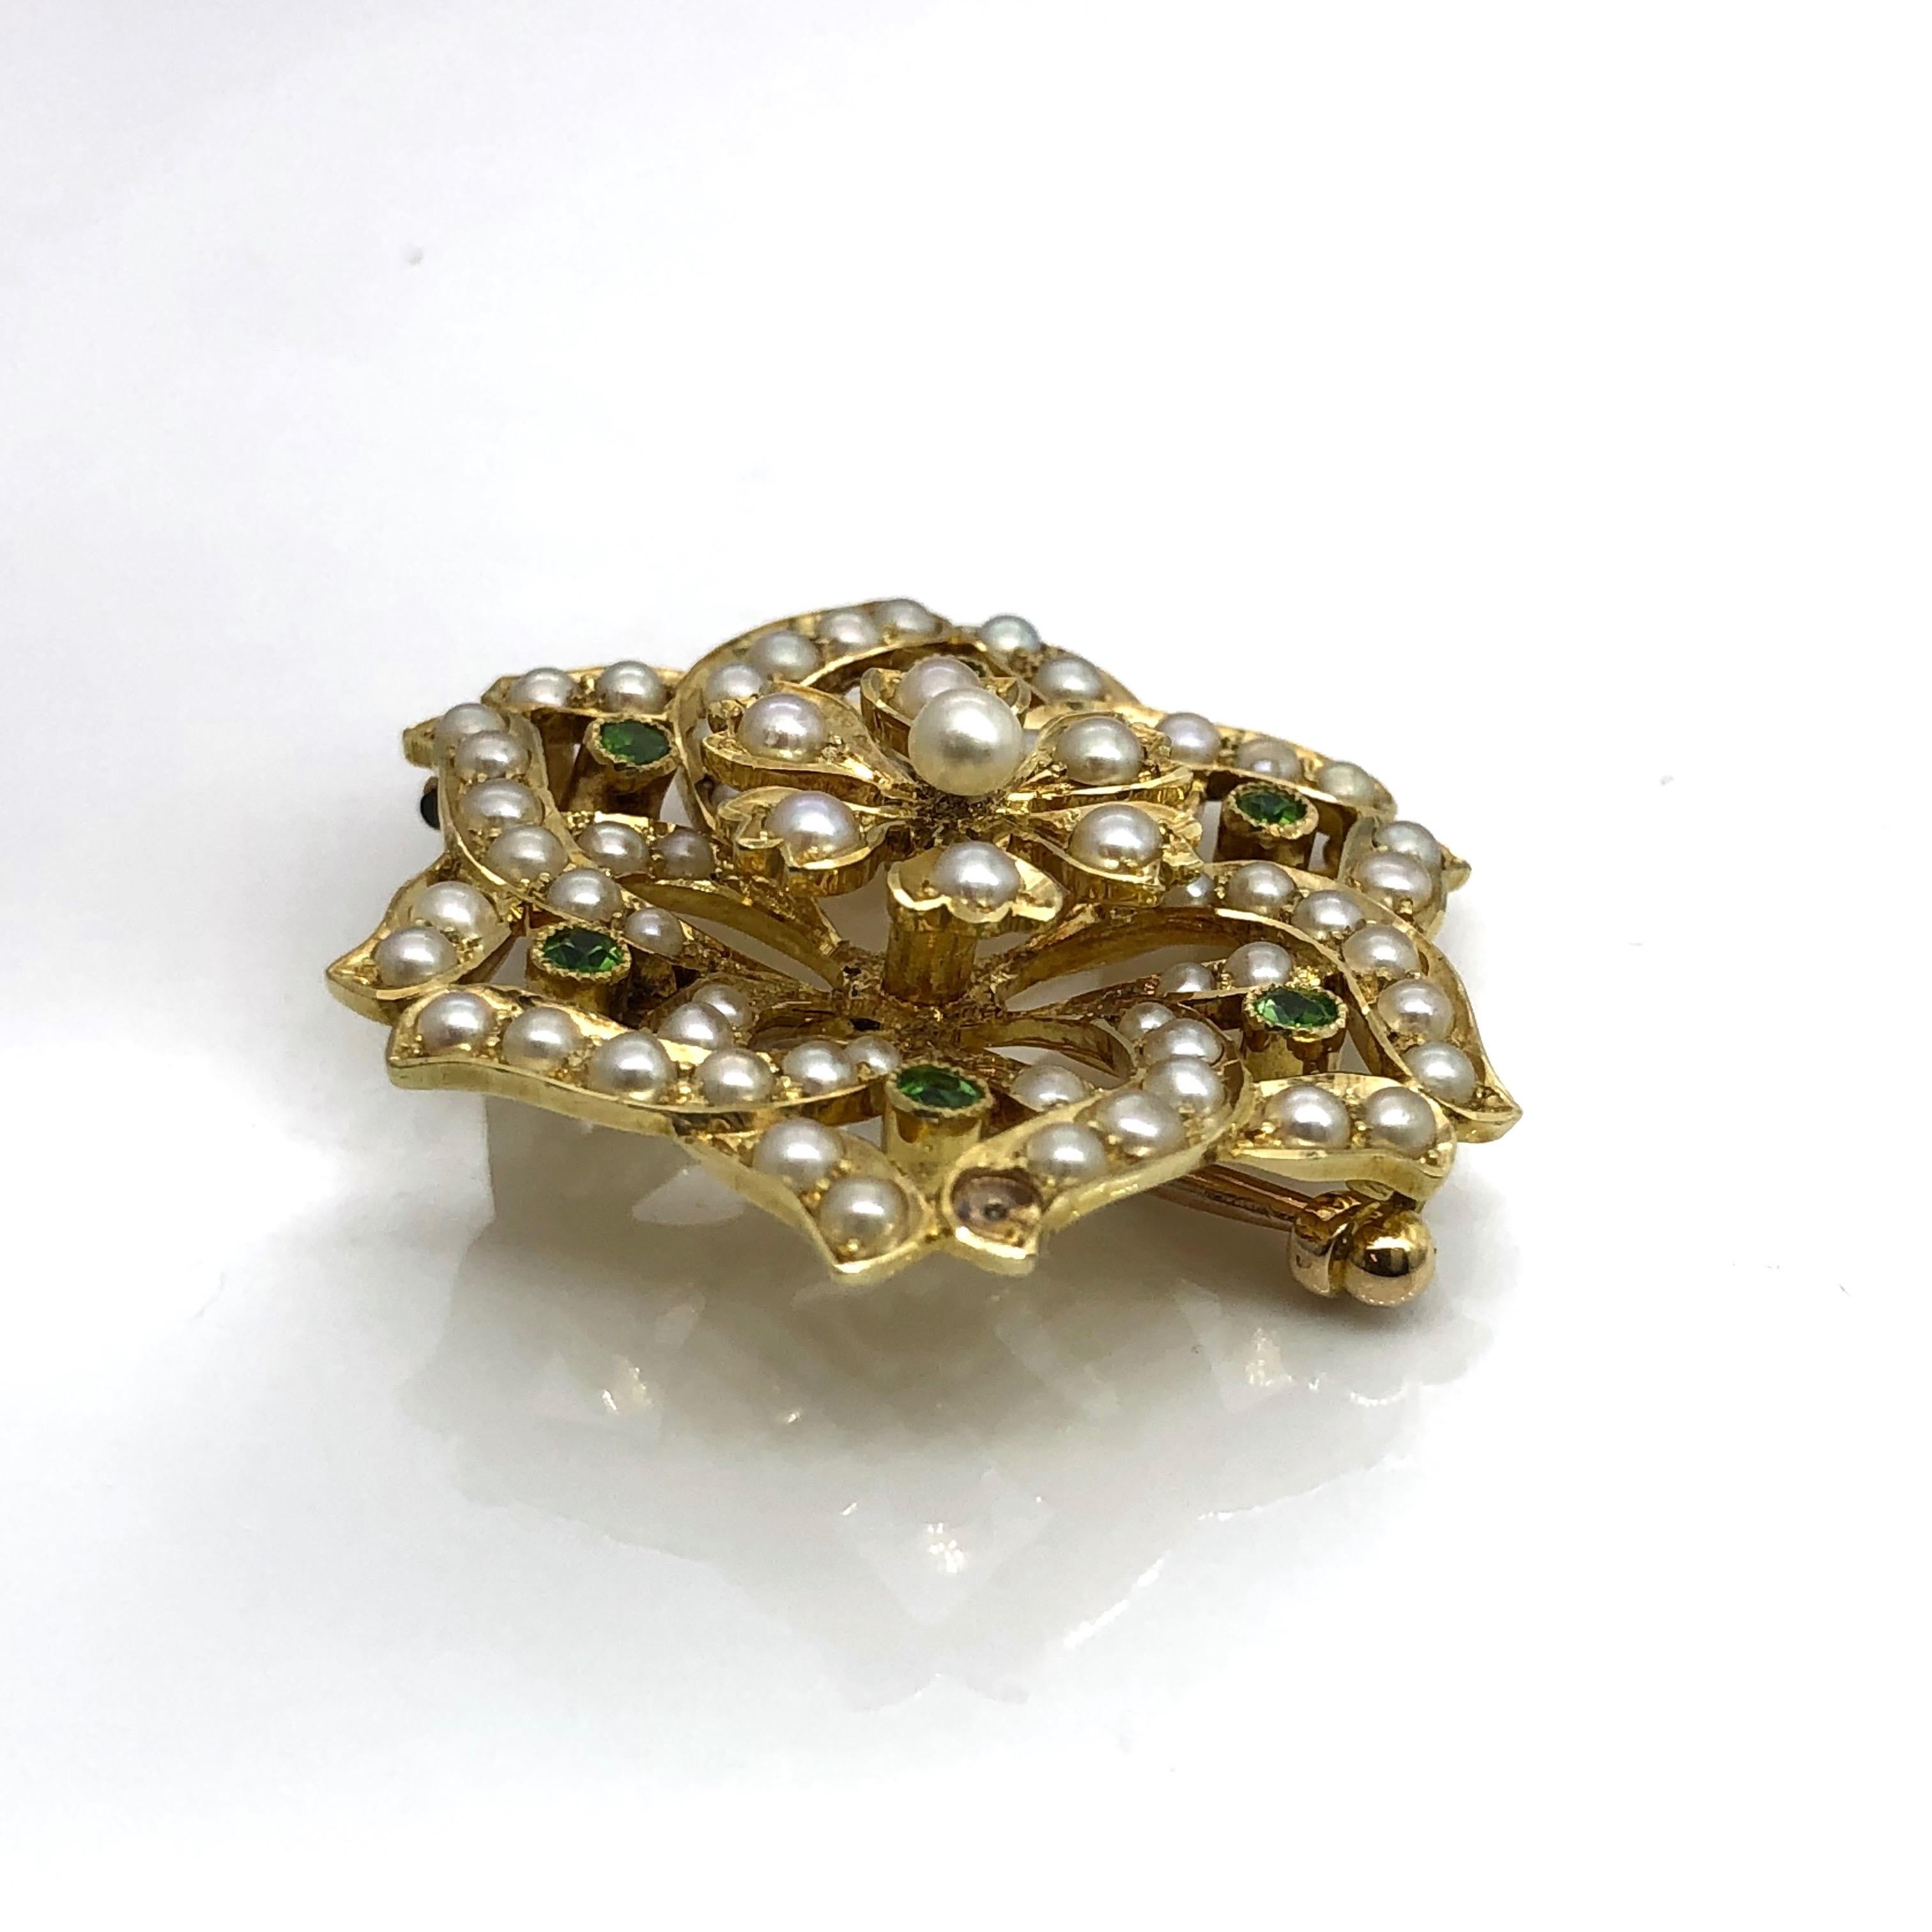 Stunning Antique Late Victorian 15 Carat yellow gold Brooch
Encrusted with Seed Pearls and Peridots
In a shape of a flower with an elevated centre.
Dimensions: 31.2 mm x 31.2 mm.
Brooch weight is 8.6 grams